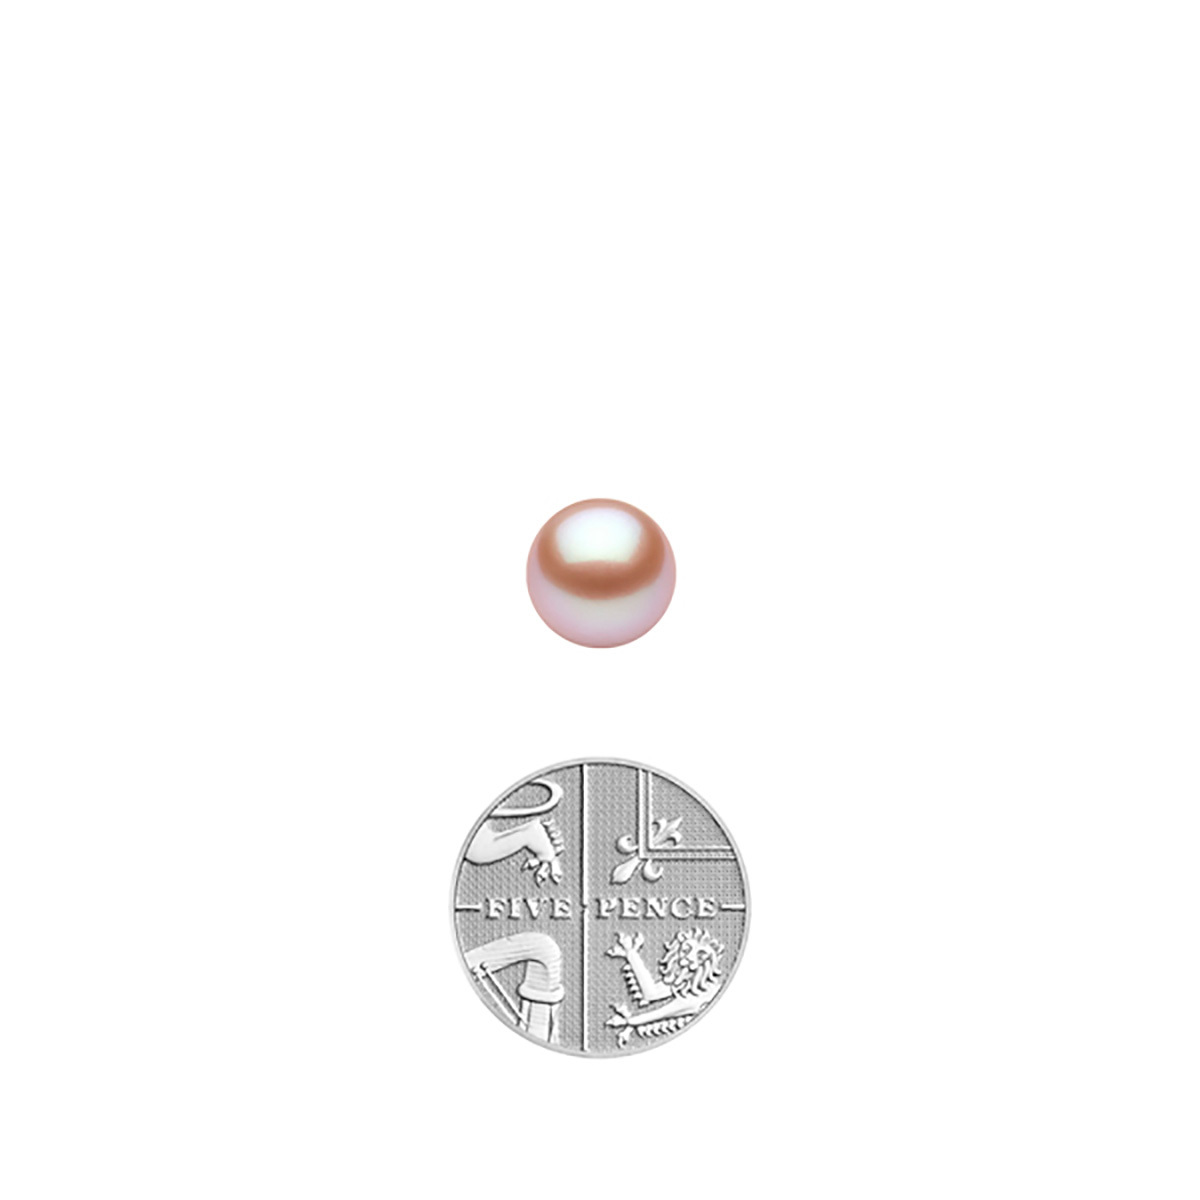 9-9.5mm Cultured Freshwater Peach Pearl Stud Earrings, 18ct White Gold